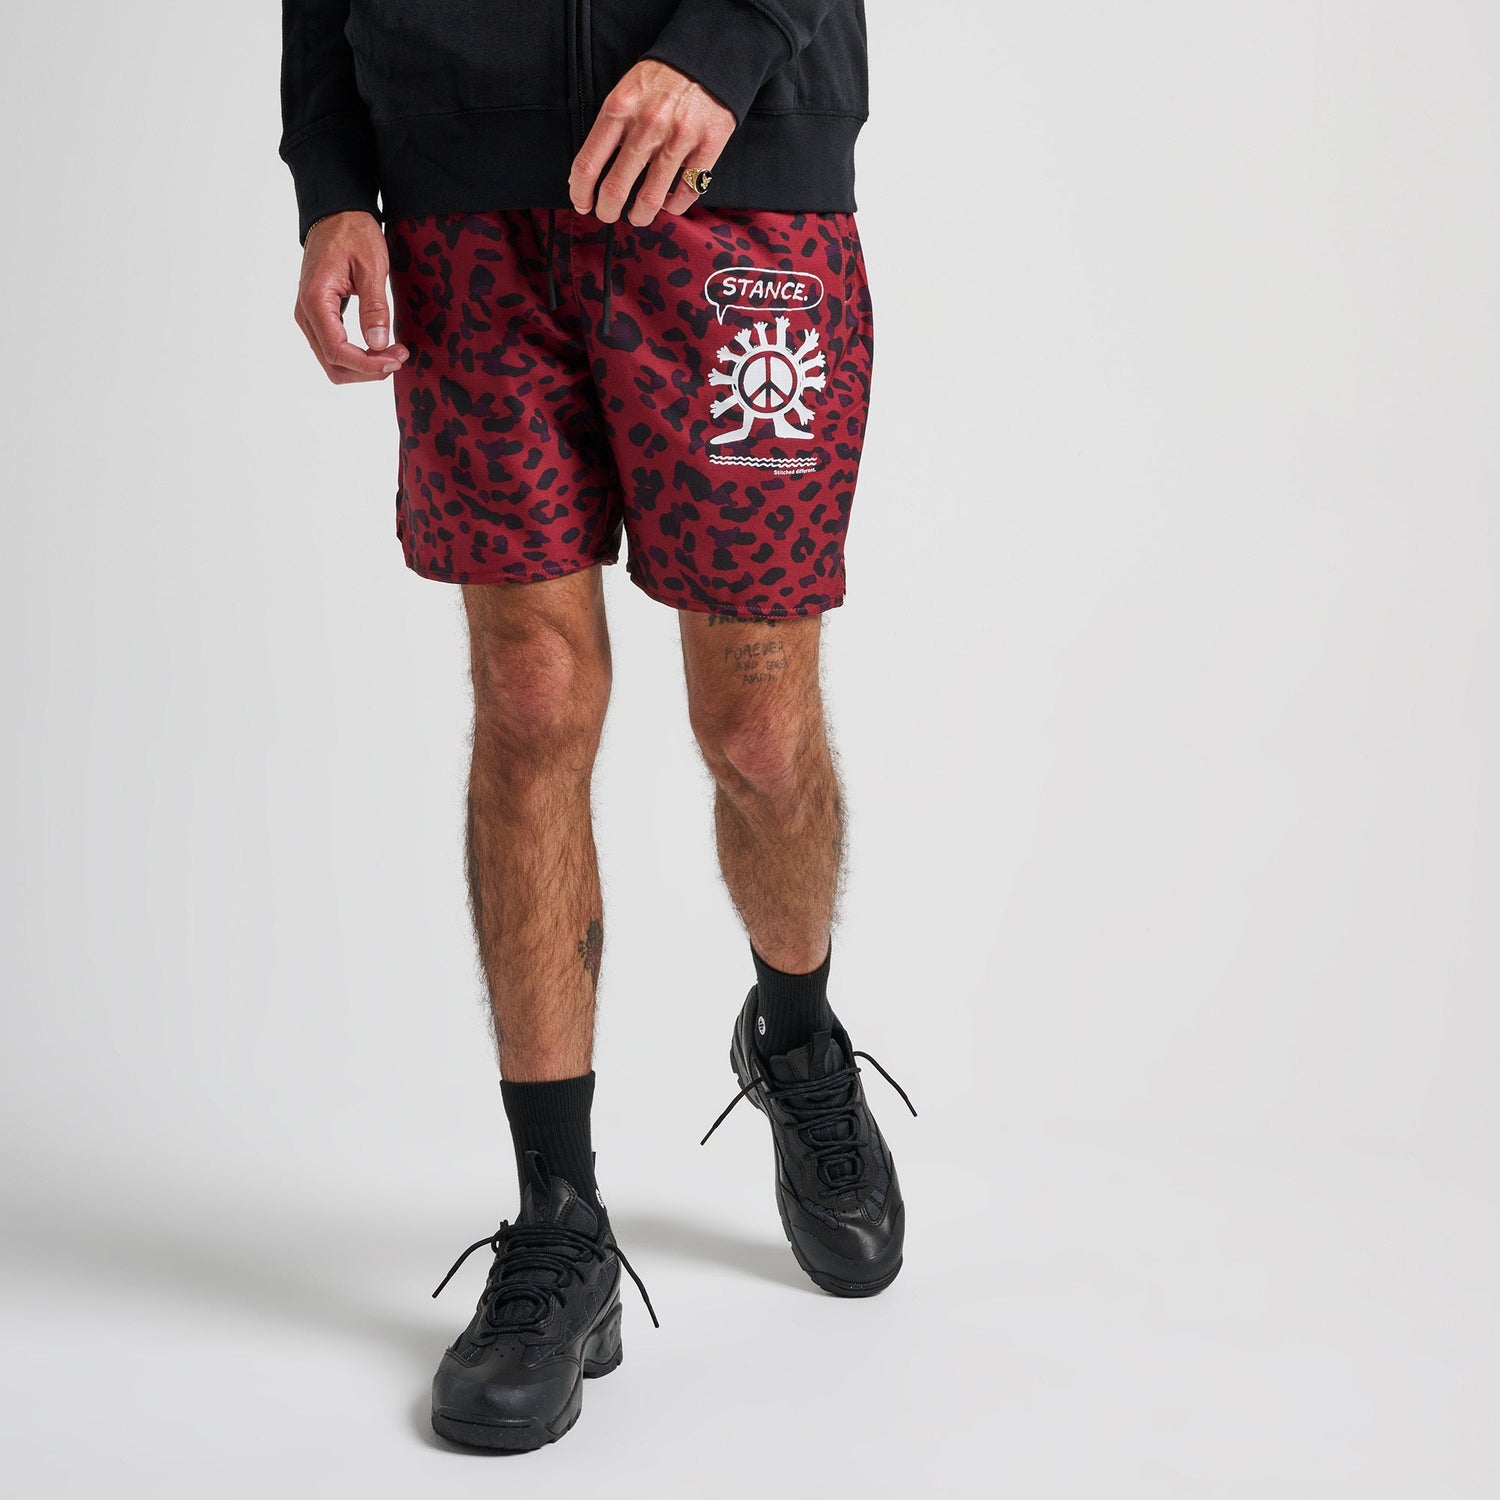 Stance Complex Athletic Short Red